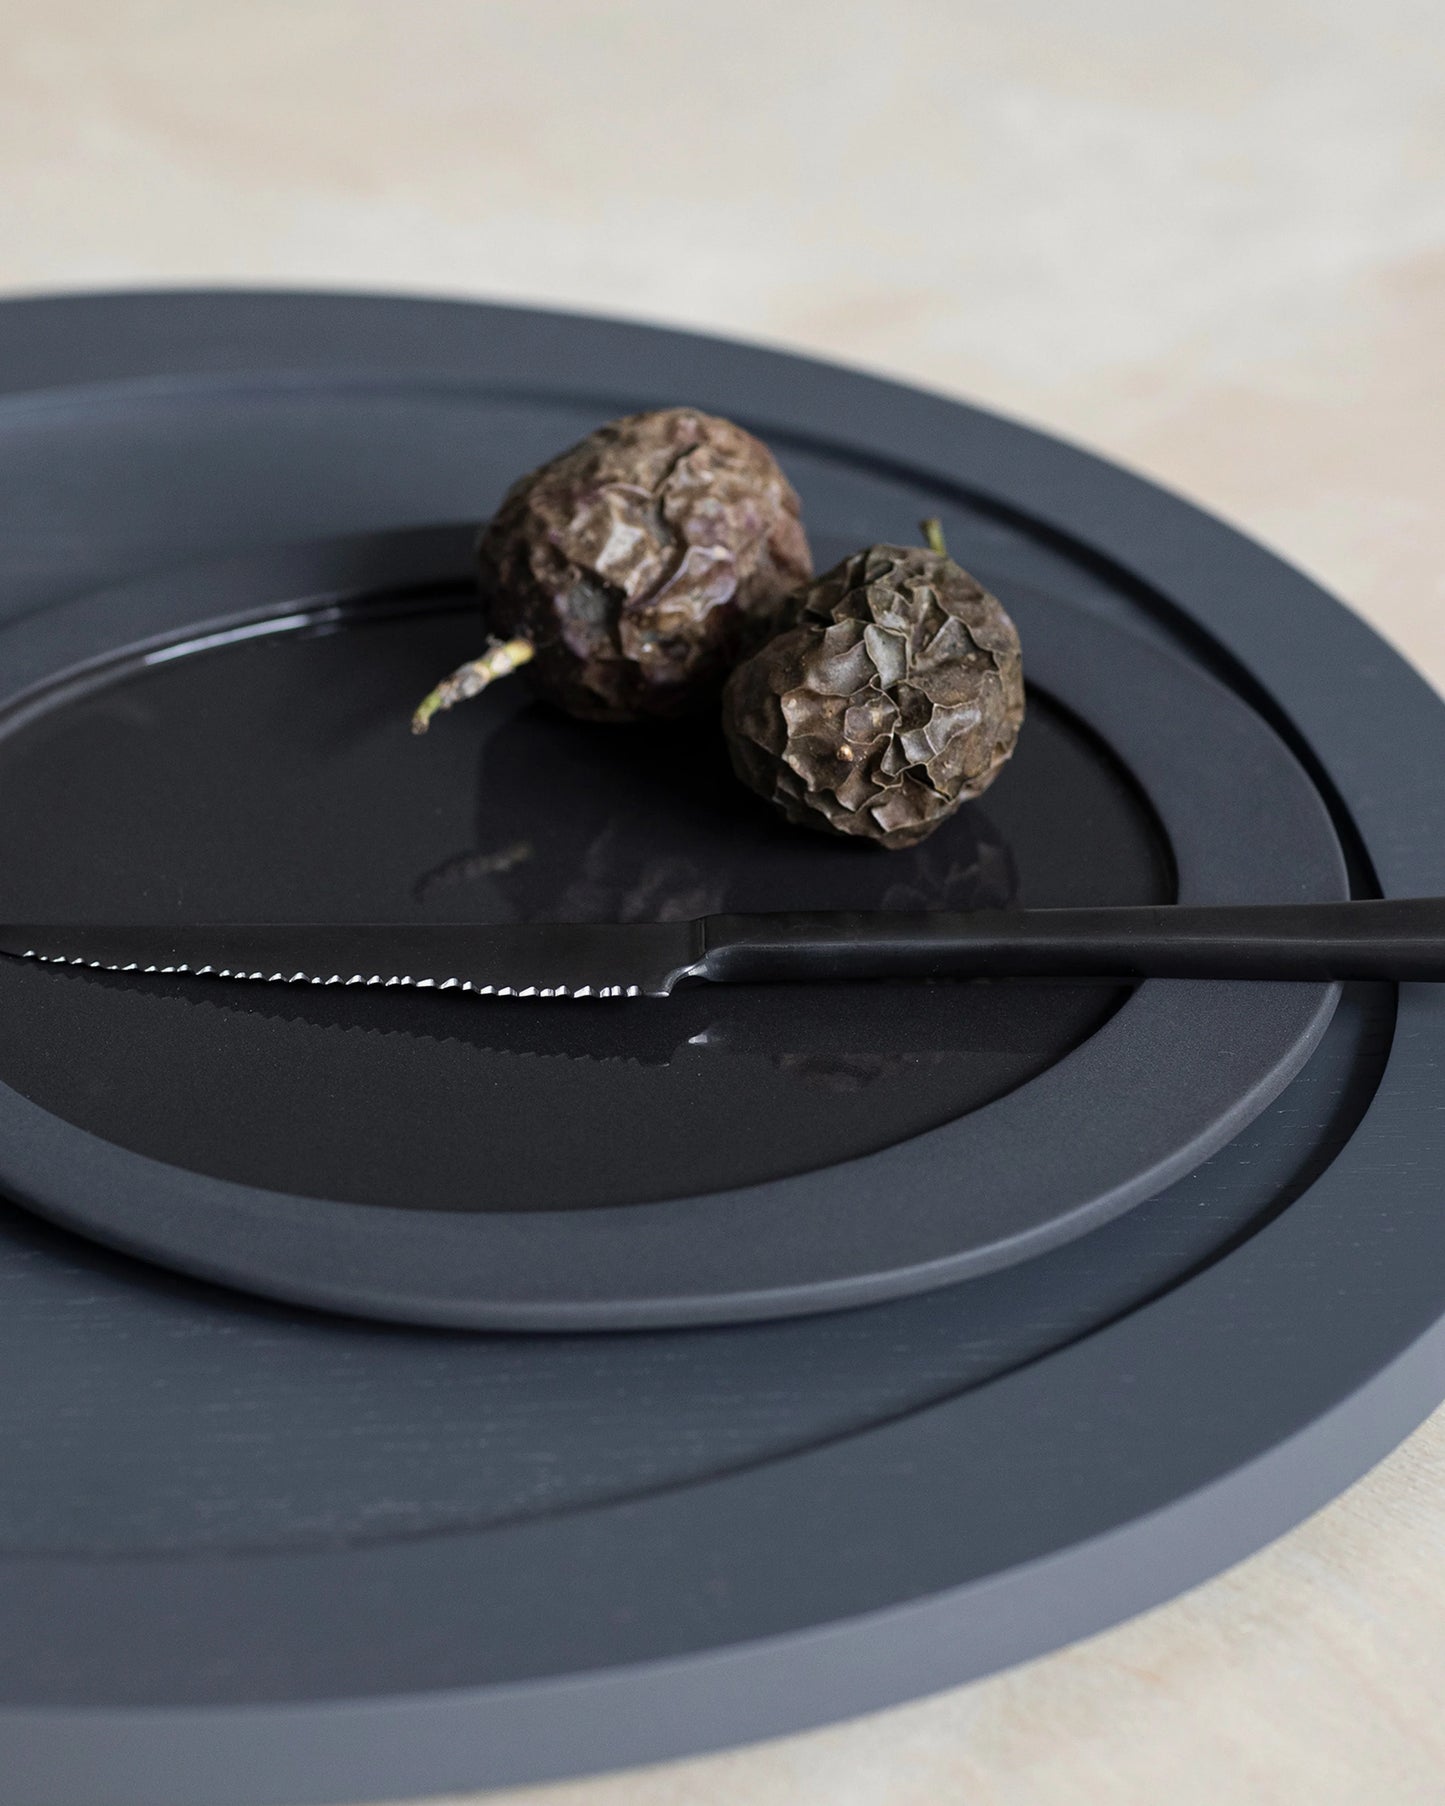 Valerie Objects Inner circle Small Plate, grey by Maarten Baas - $43.00